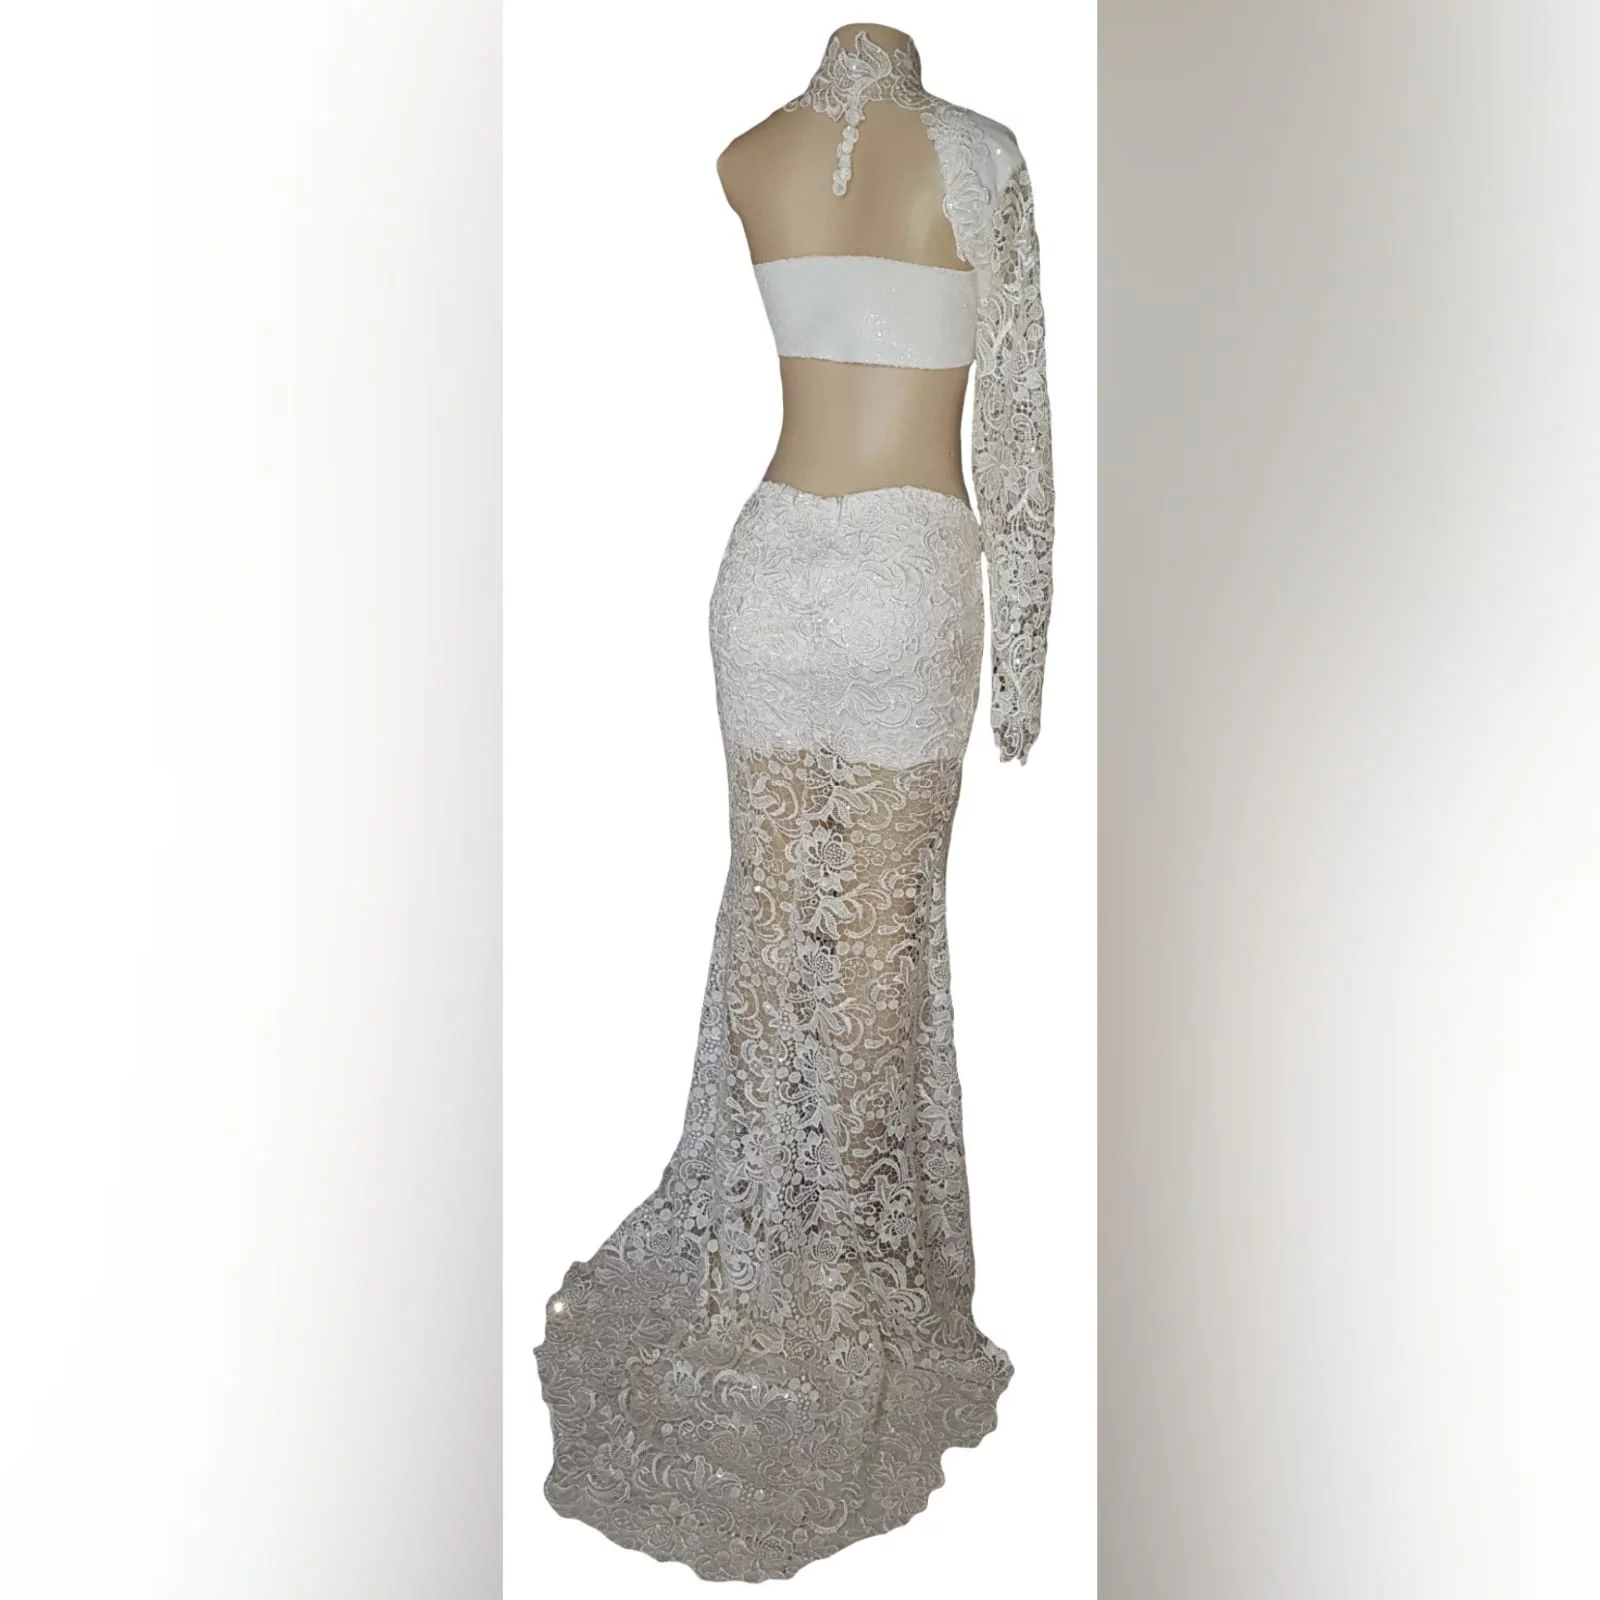 White lace long, sexy evening dress 11 white lace long, sexy evening dress created for new years eve party. With a sequins bodice, side tummy openings, naked lower back. Chocker lace neckline and a sheer long fitted sleeve. The legs are sheer lace with a middle slit and a train.